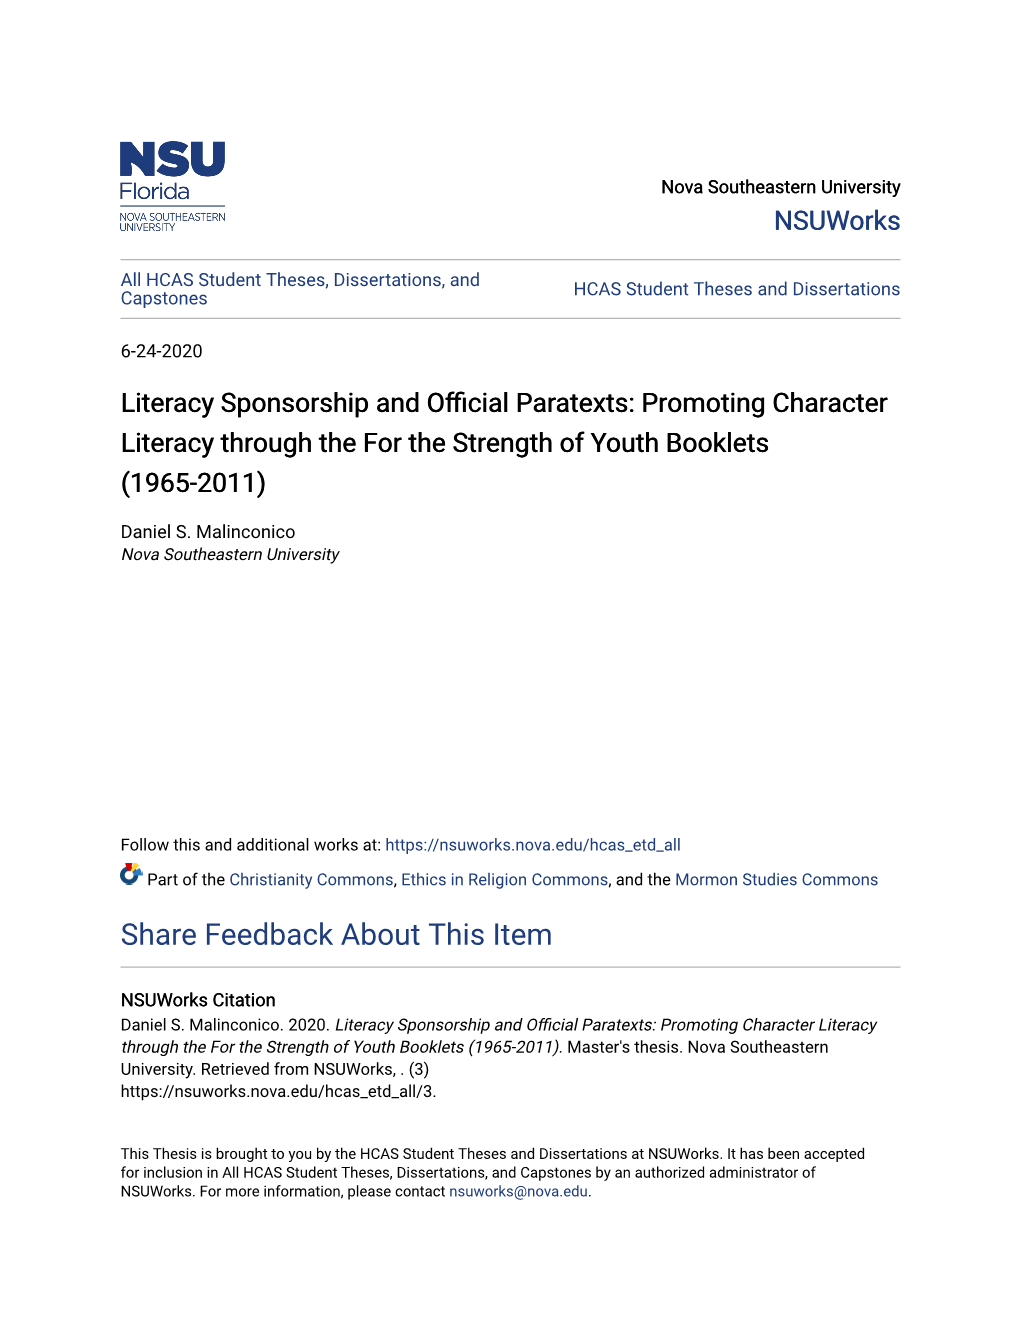 Promoting Character Literacy Through the for the Strength of Youth Booklets (1965-2011)